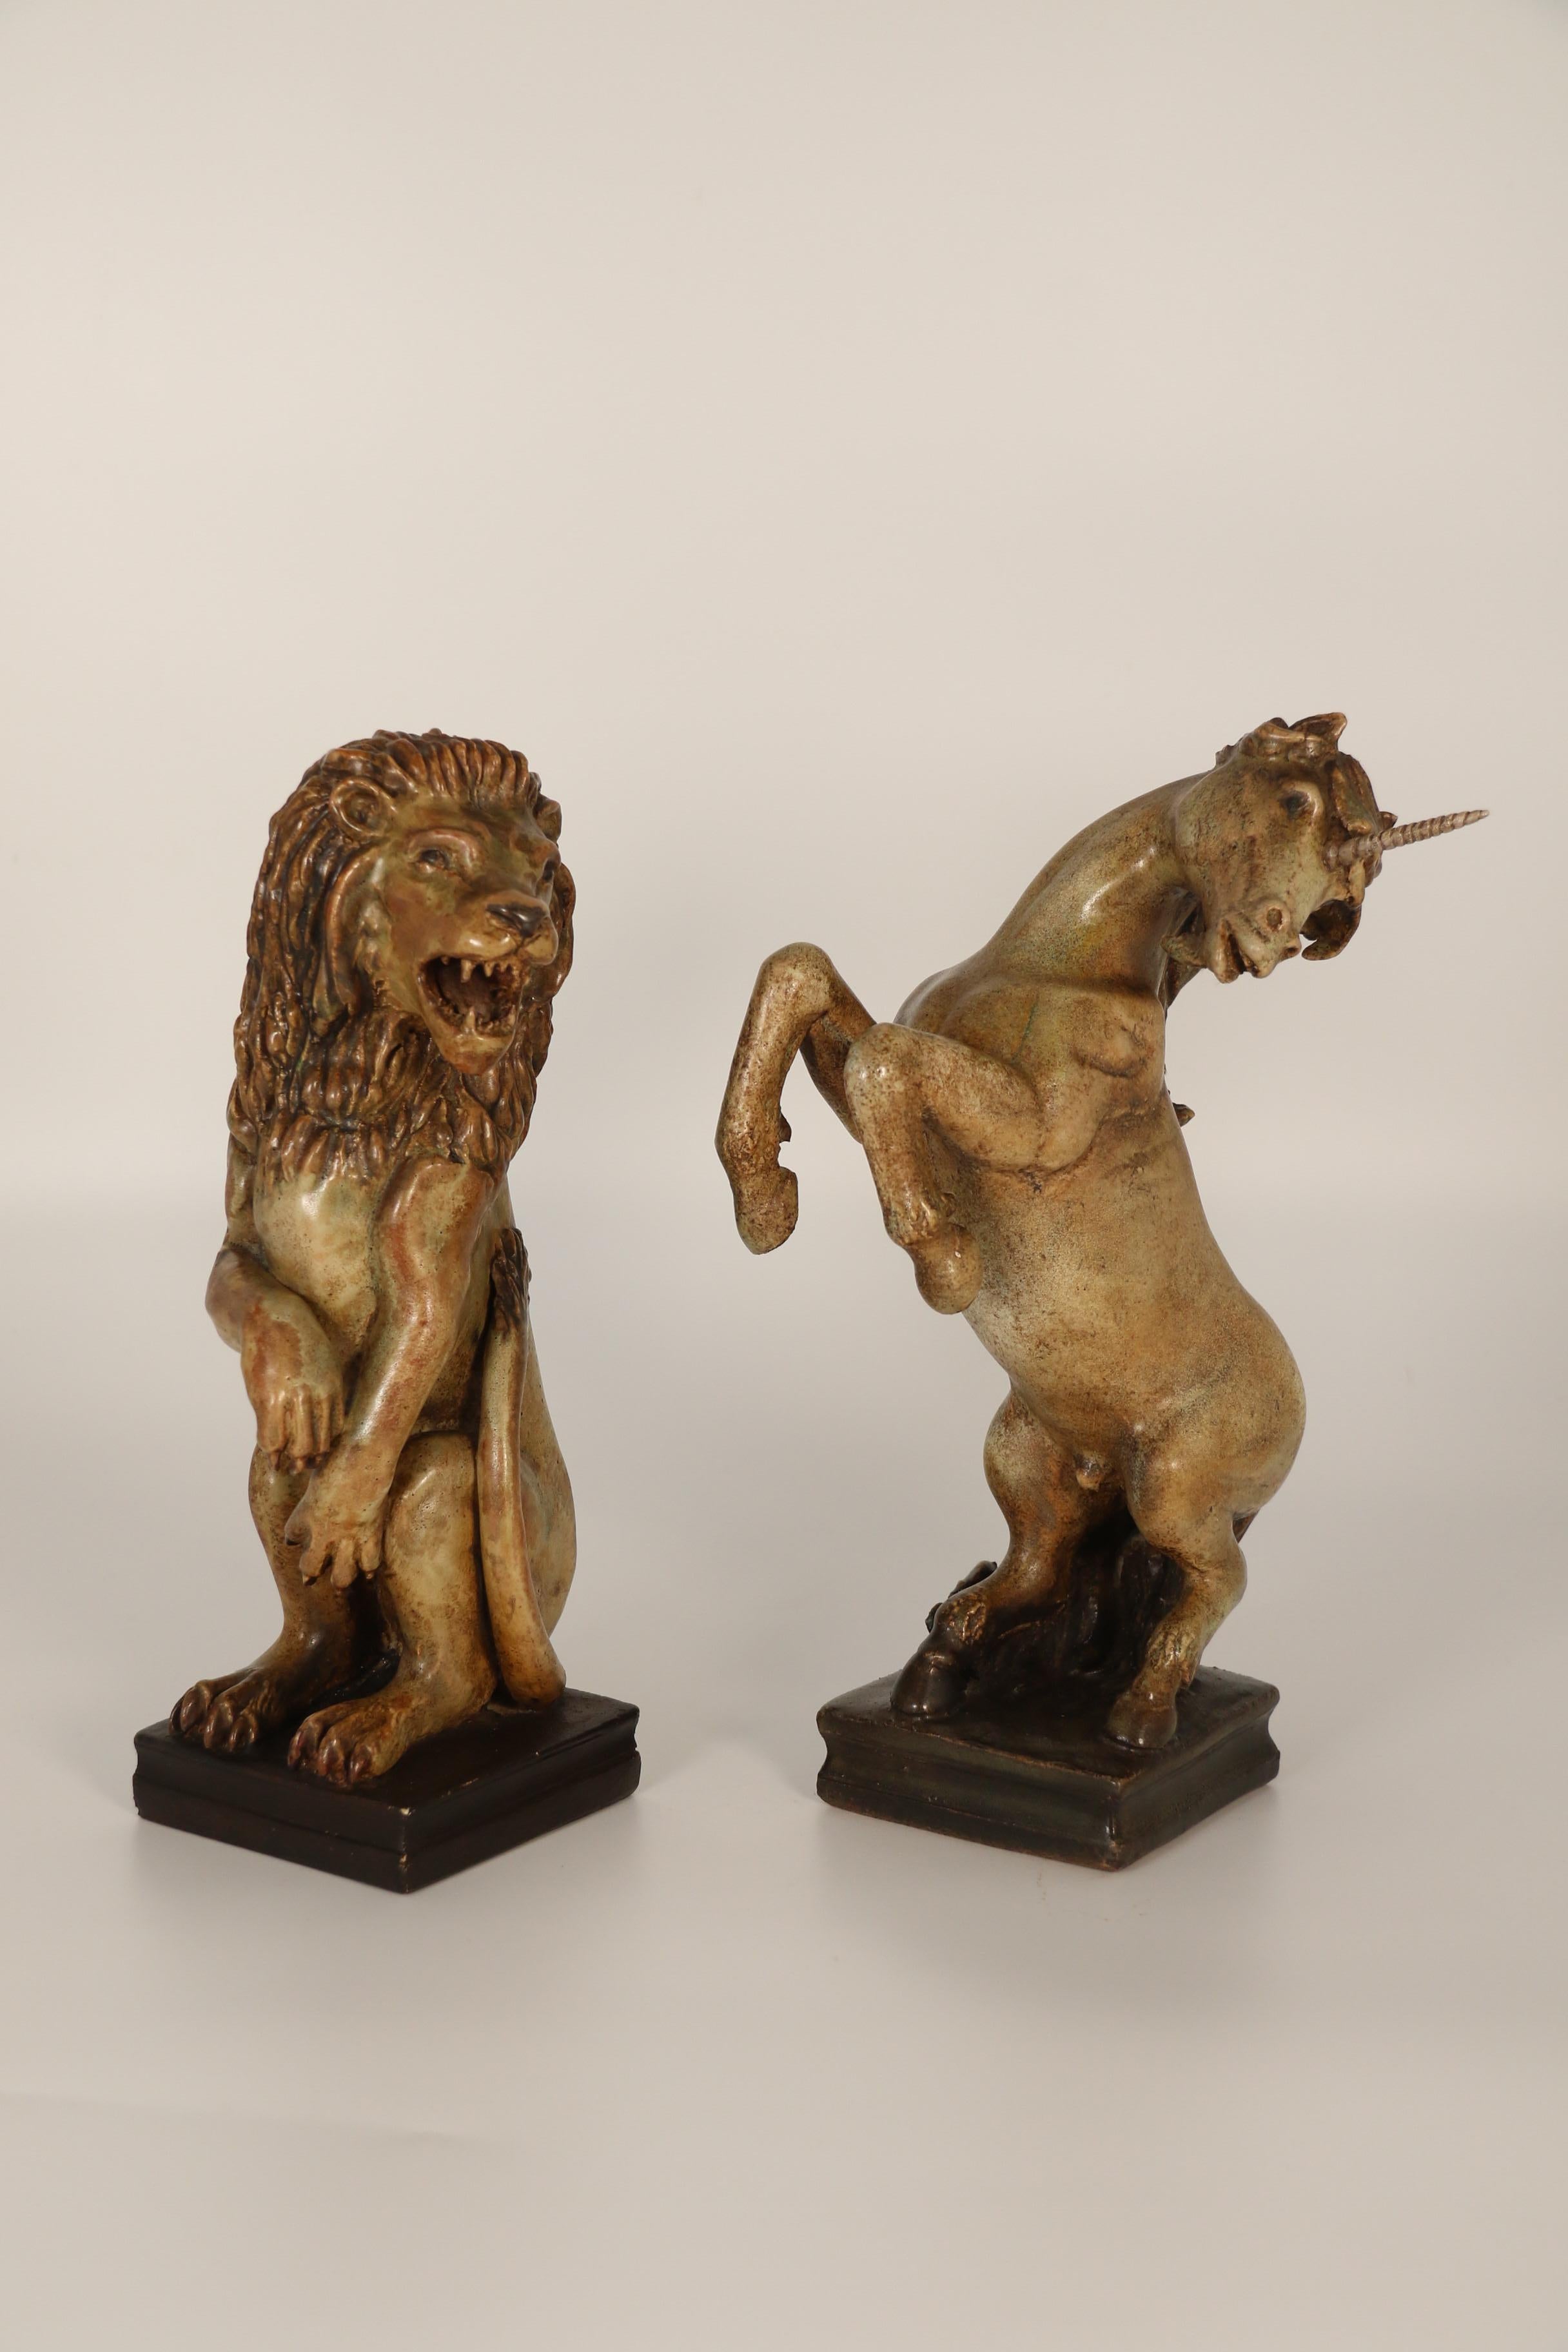 These beautiful hand sculpted pottery heraldic figures of a lion and unicorn are most unusual.  They are of European manufacture and were most likely made as one-off individual pieces as there is a slight difference in the design of the bases.

Each